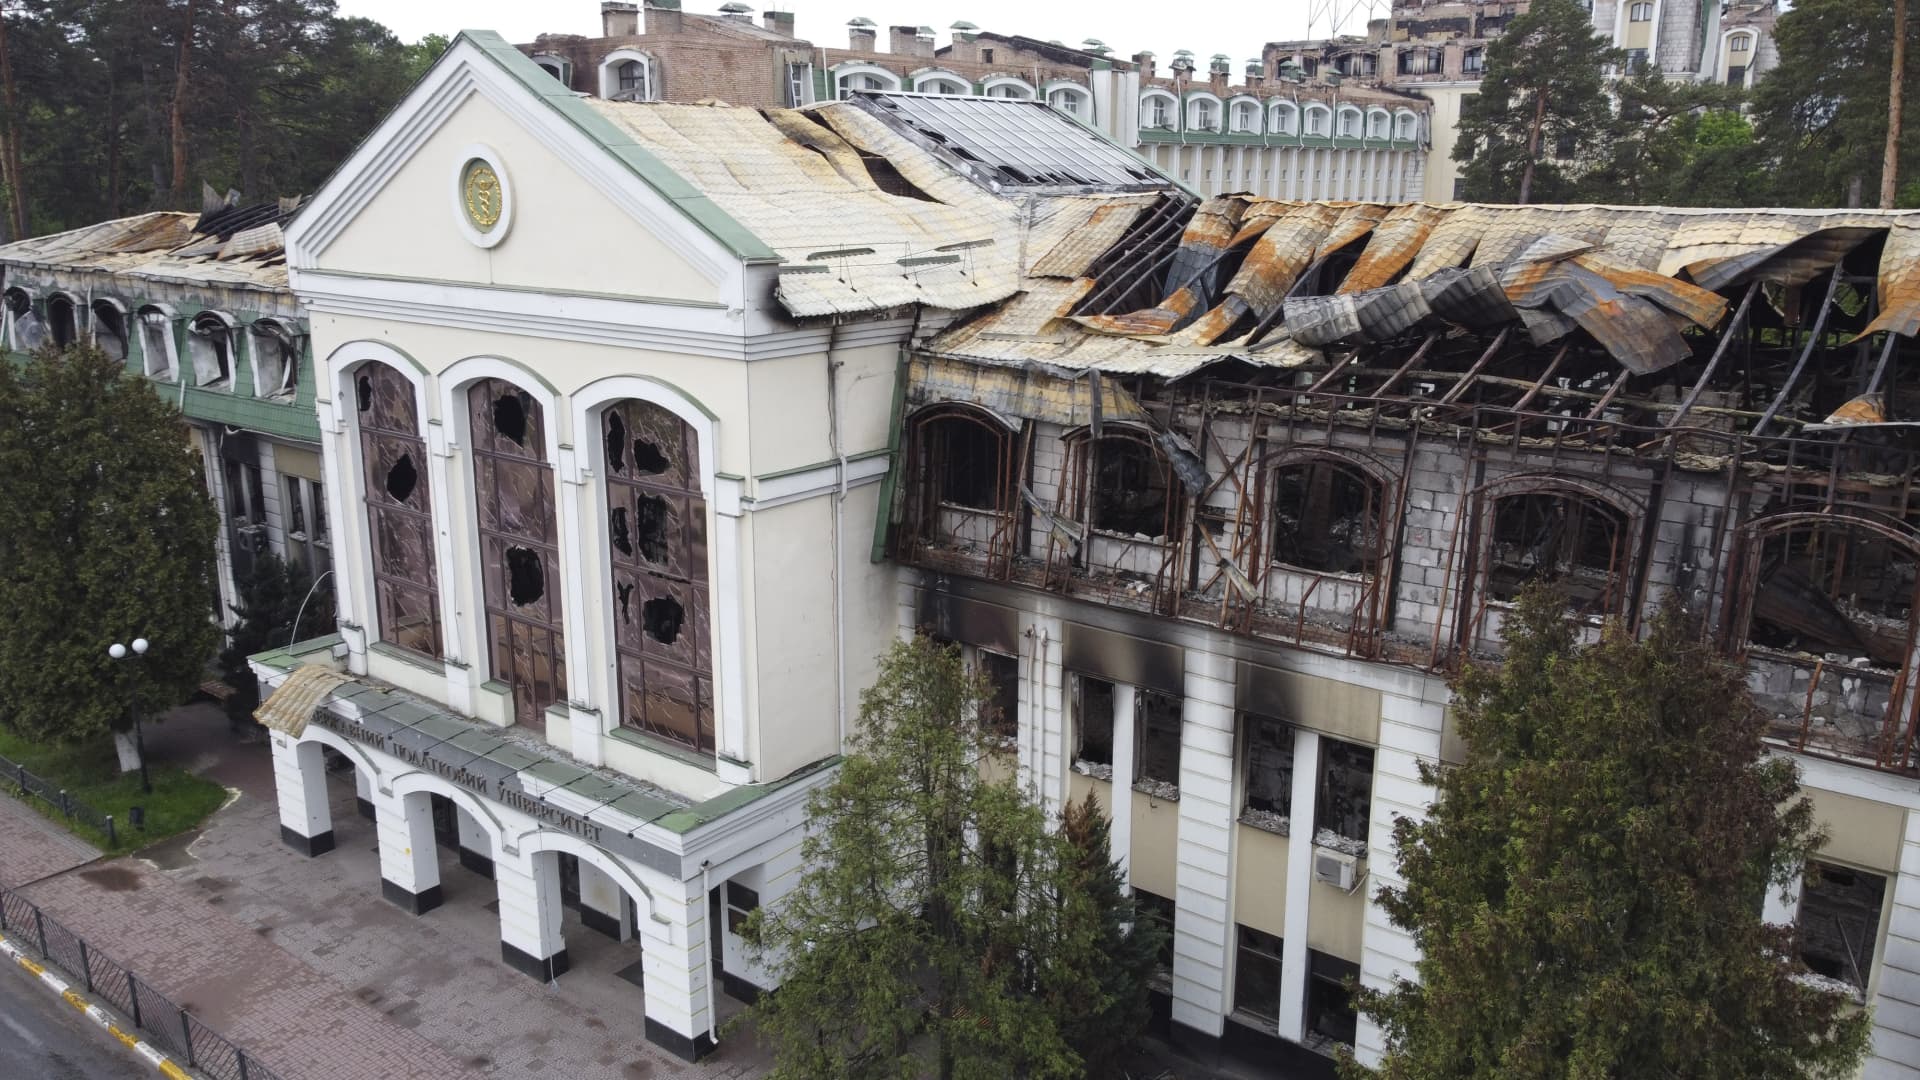 A view of destroyed State Tax University, which was used as shelter by civilians during Russian attacks, in Irpin, Ukraine on May 25, 2022.